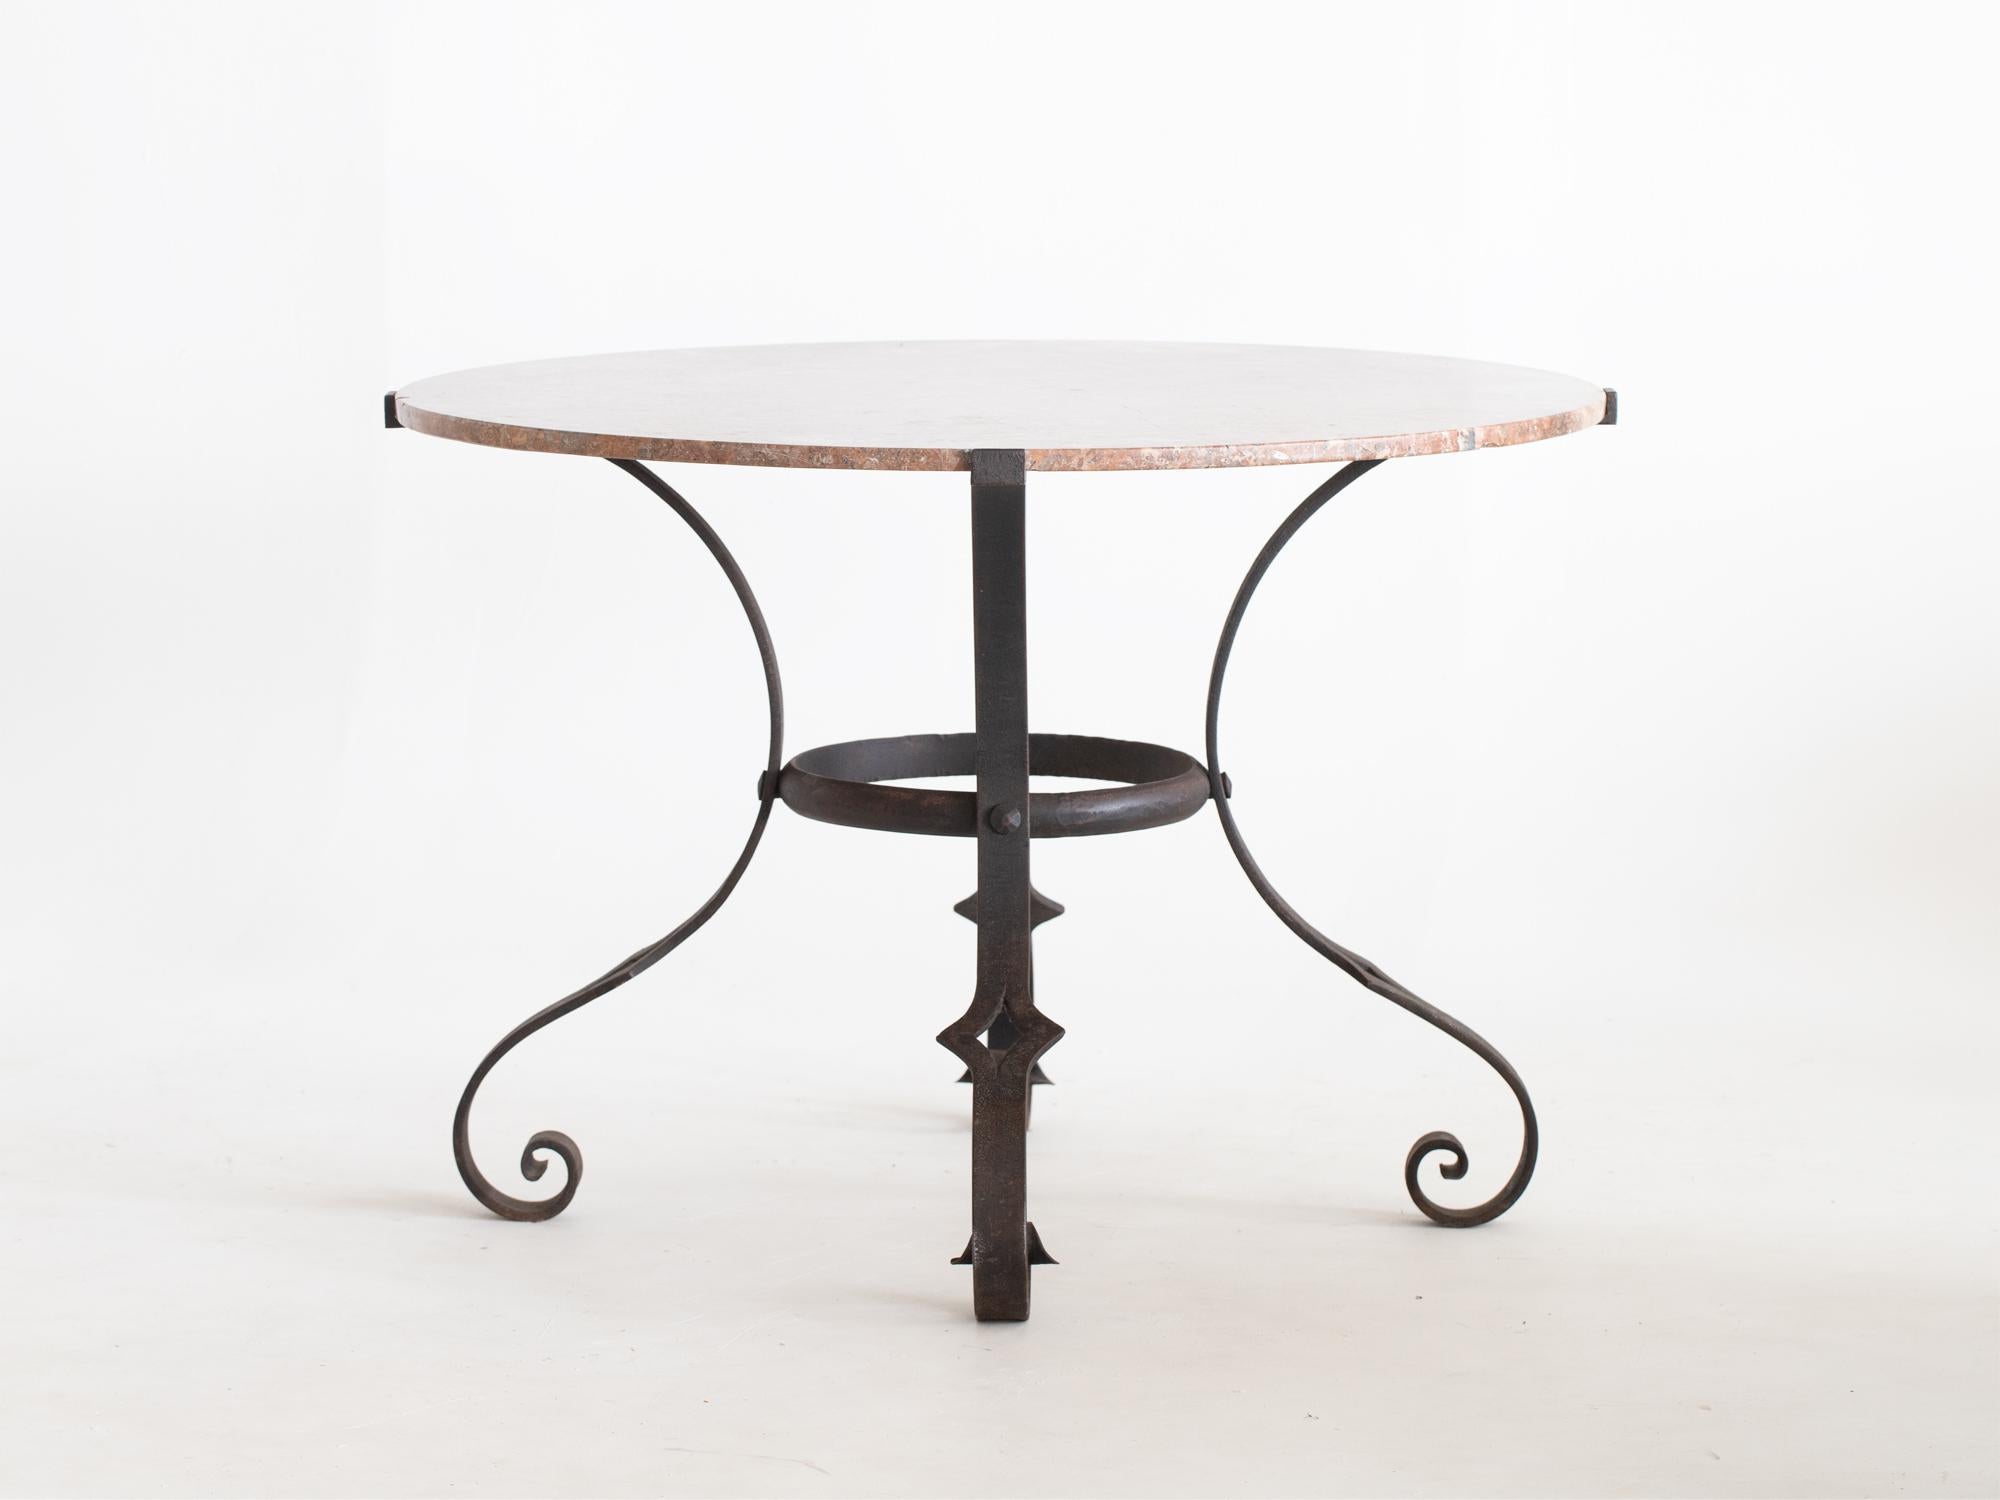 A circular red marble and wrought iron centre or dining table. French, c. 1950s.

Stock ref. #2201

In good sturdy order. Small losses to the marble edge.

75 x 108 x 108 cm

29.5 x 42.5 x 42.5 